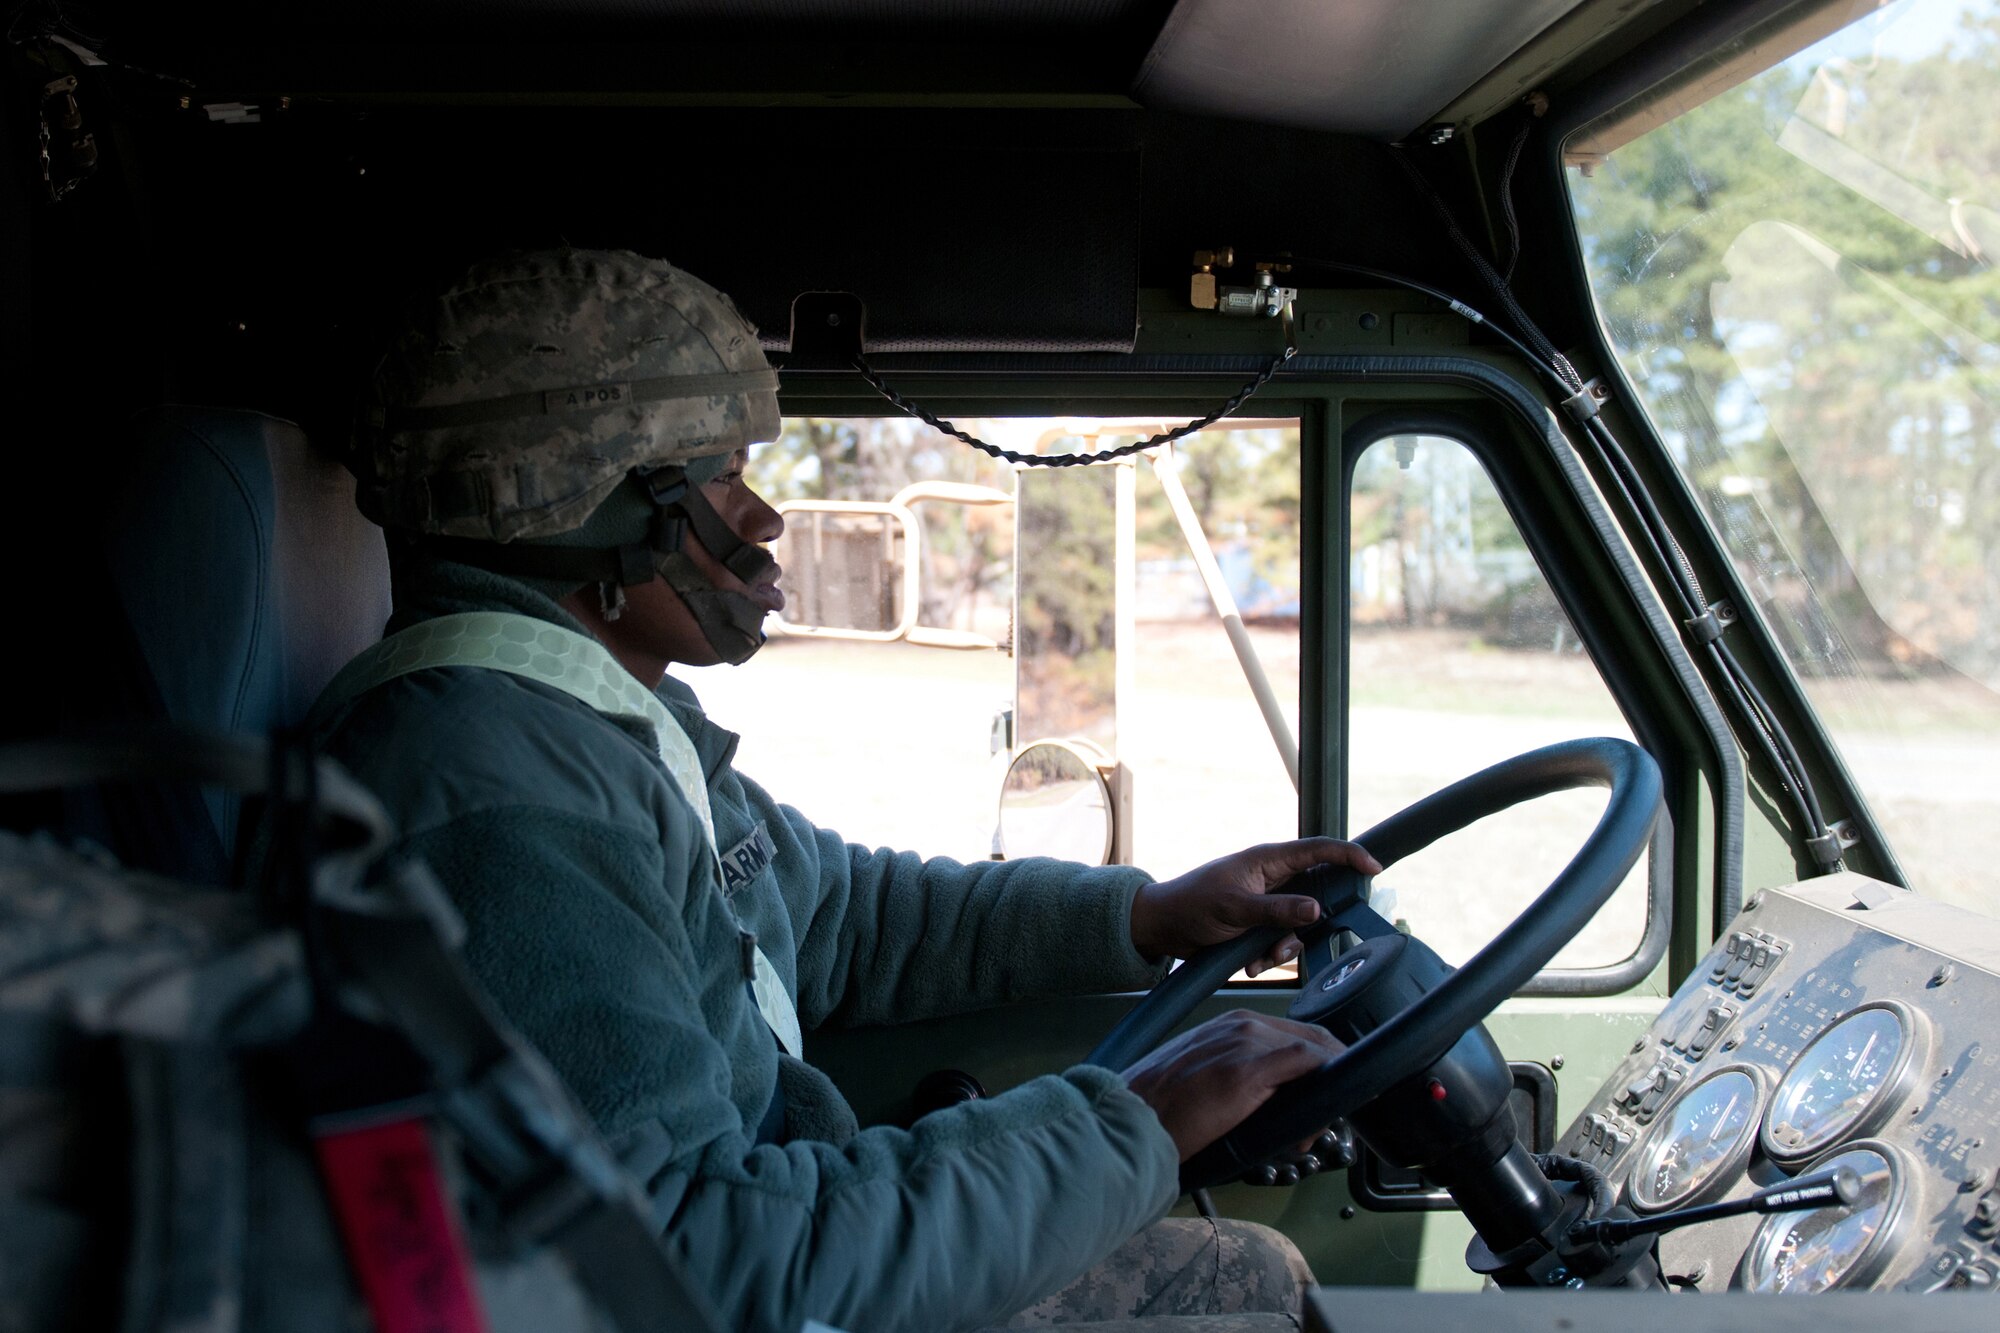 Army Sgt. Billy Artis, a transporter from the 690th Rapid Port Opening Element, drives cargo from the marshaling yard at Lakehurst Naval Air Engineering Station, N.J., to a forward distribution node during Exercise Eagle Flag March 27, 2012. The Kentucky Air National Guard's 123rd Contingency Response Group from Louisville, Ky., and the 690th from Fort Eustis, Va., joined forces for the exercise to form a Joint Task Force-Port Opening. (U.S. Air Force photo by Master Sgt. Phil Speck)